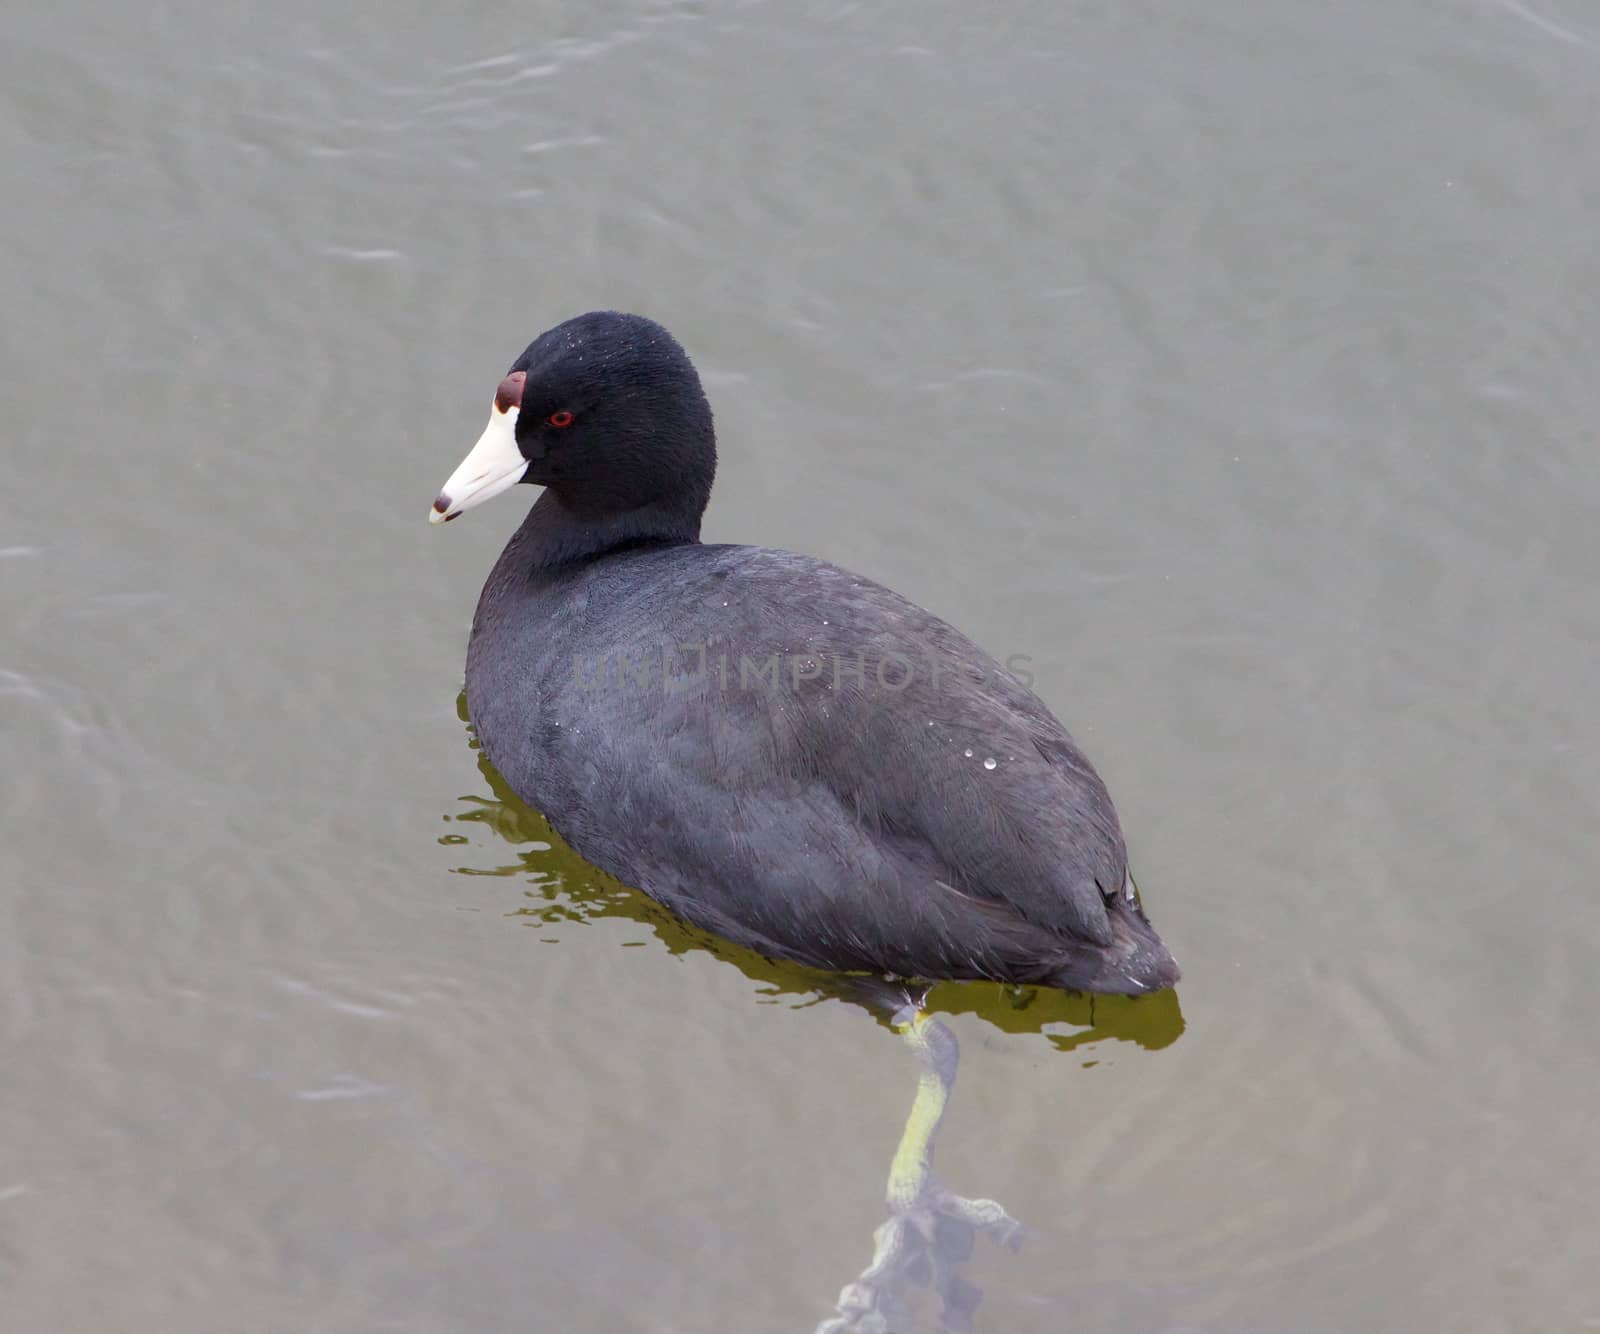 The American coot close-up by teo